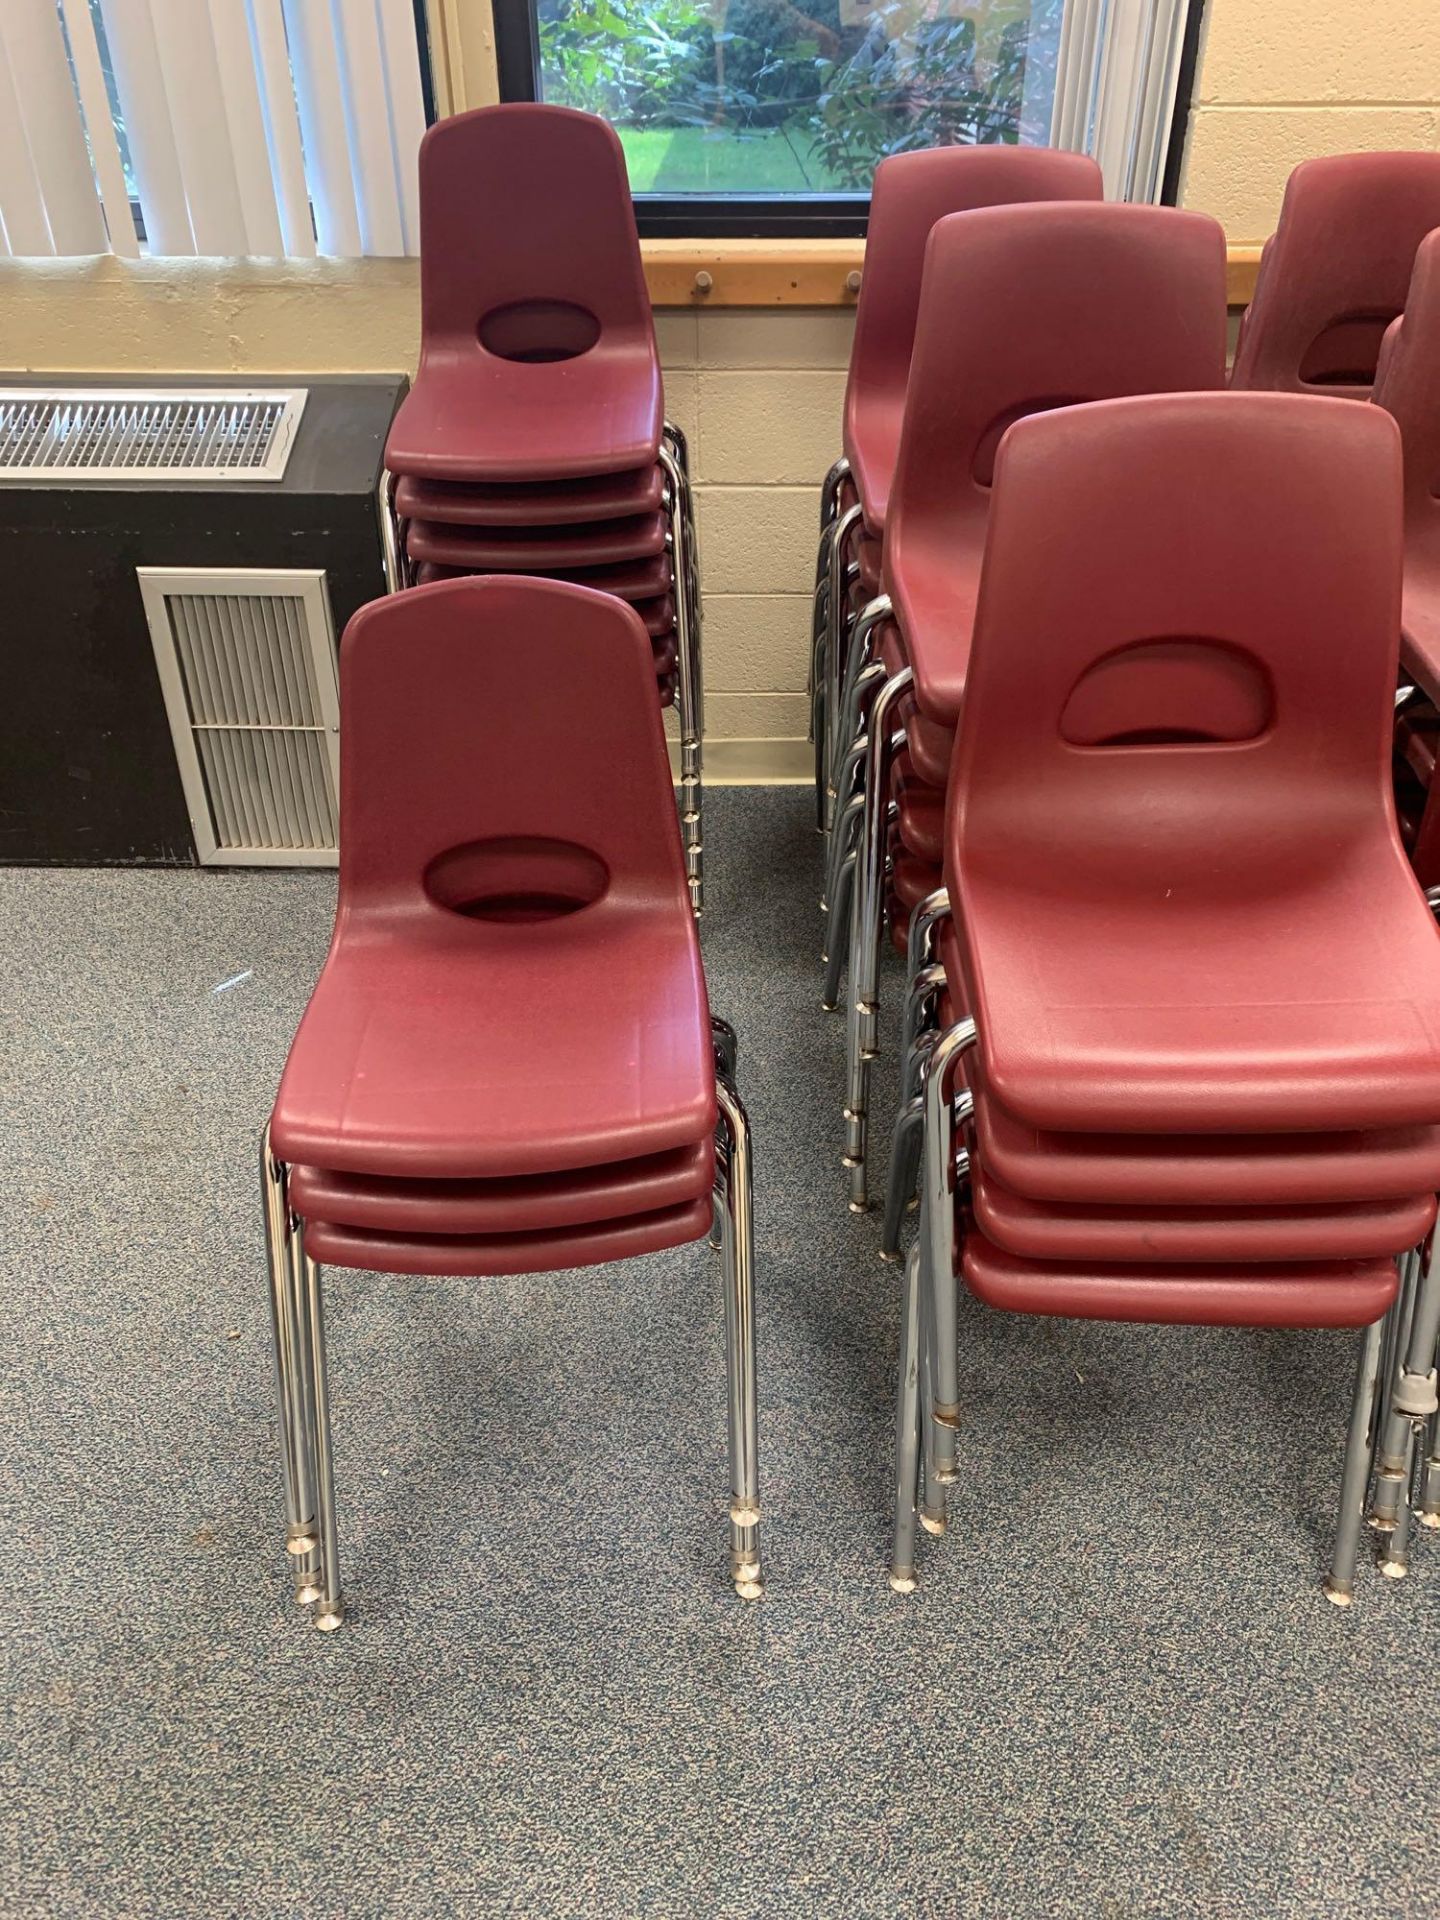 Stacking Classroom Adult Chair, 58 Matching, 18 - Image 5 of 5